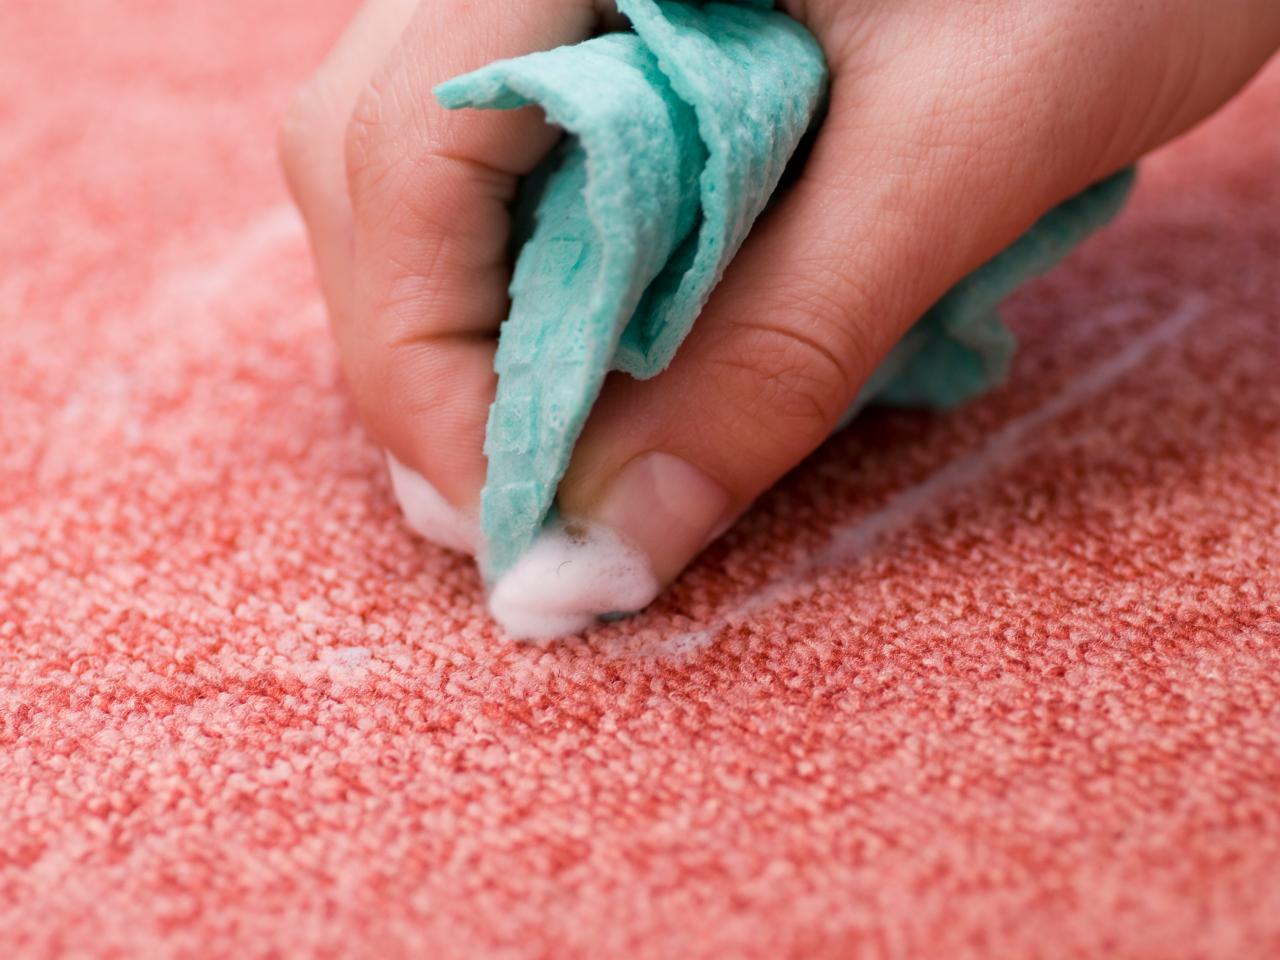 7 ways to keep your rugs clean when you have pets